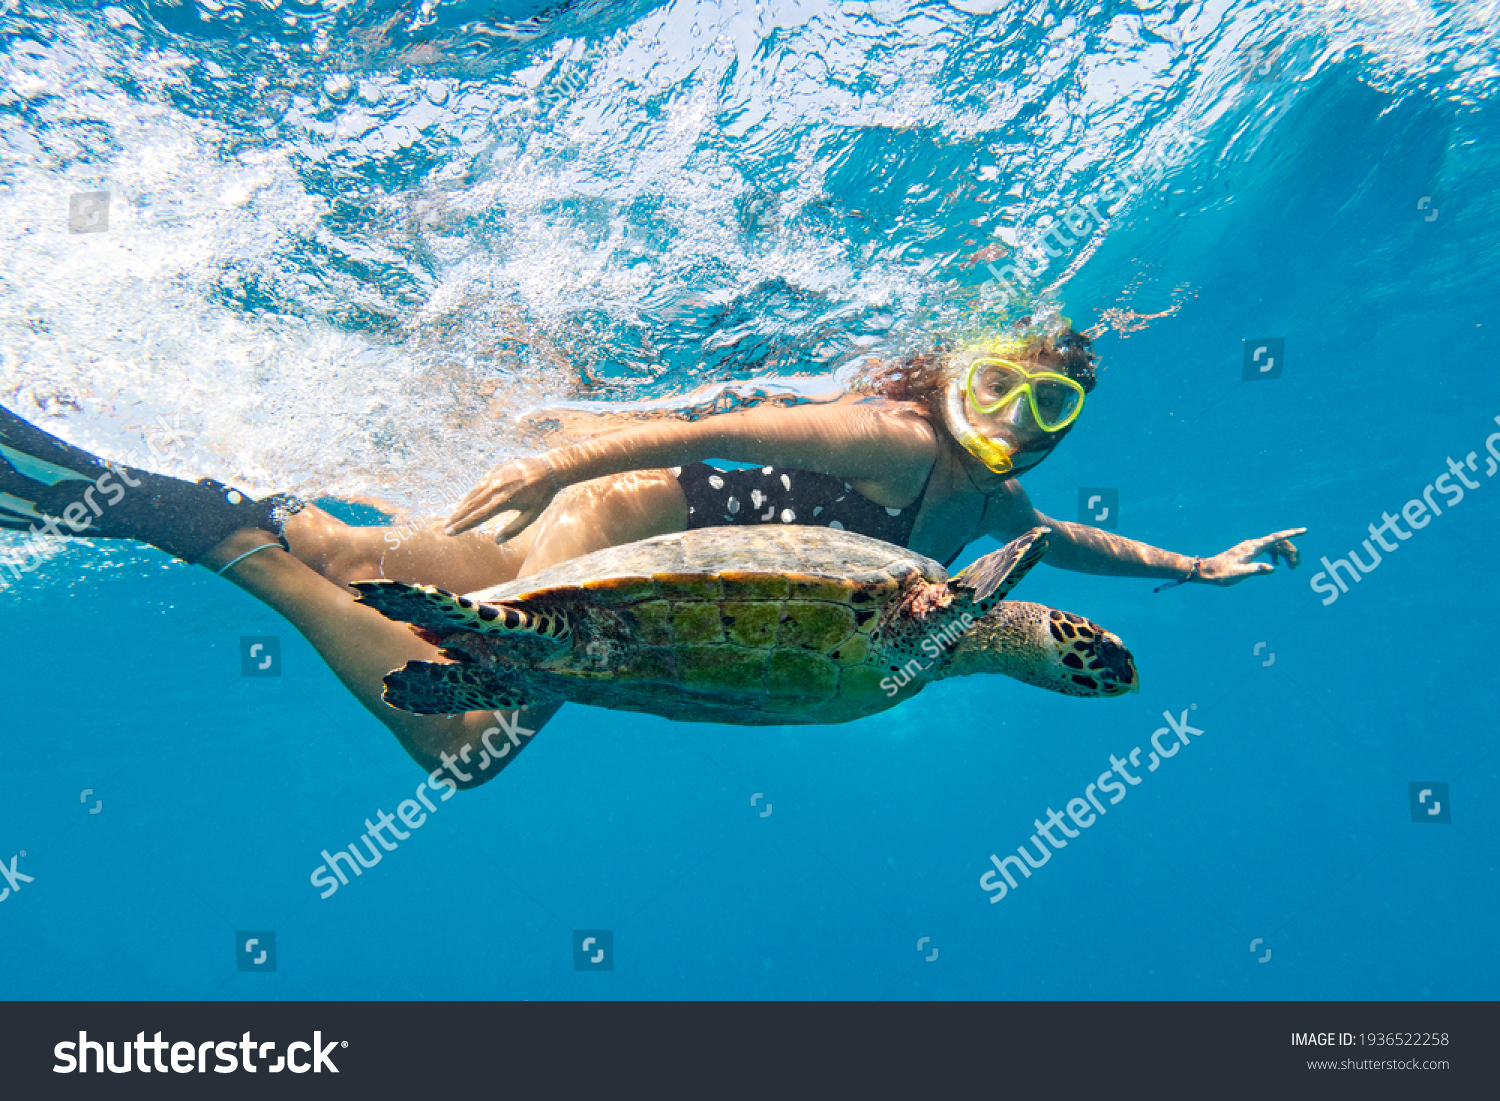 Snorkeling with a sea turtle. Girl swimming with a mask next to the turtle, Maldives #1936522258